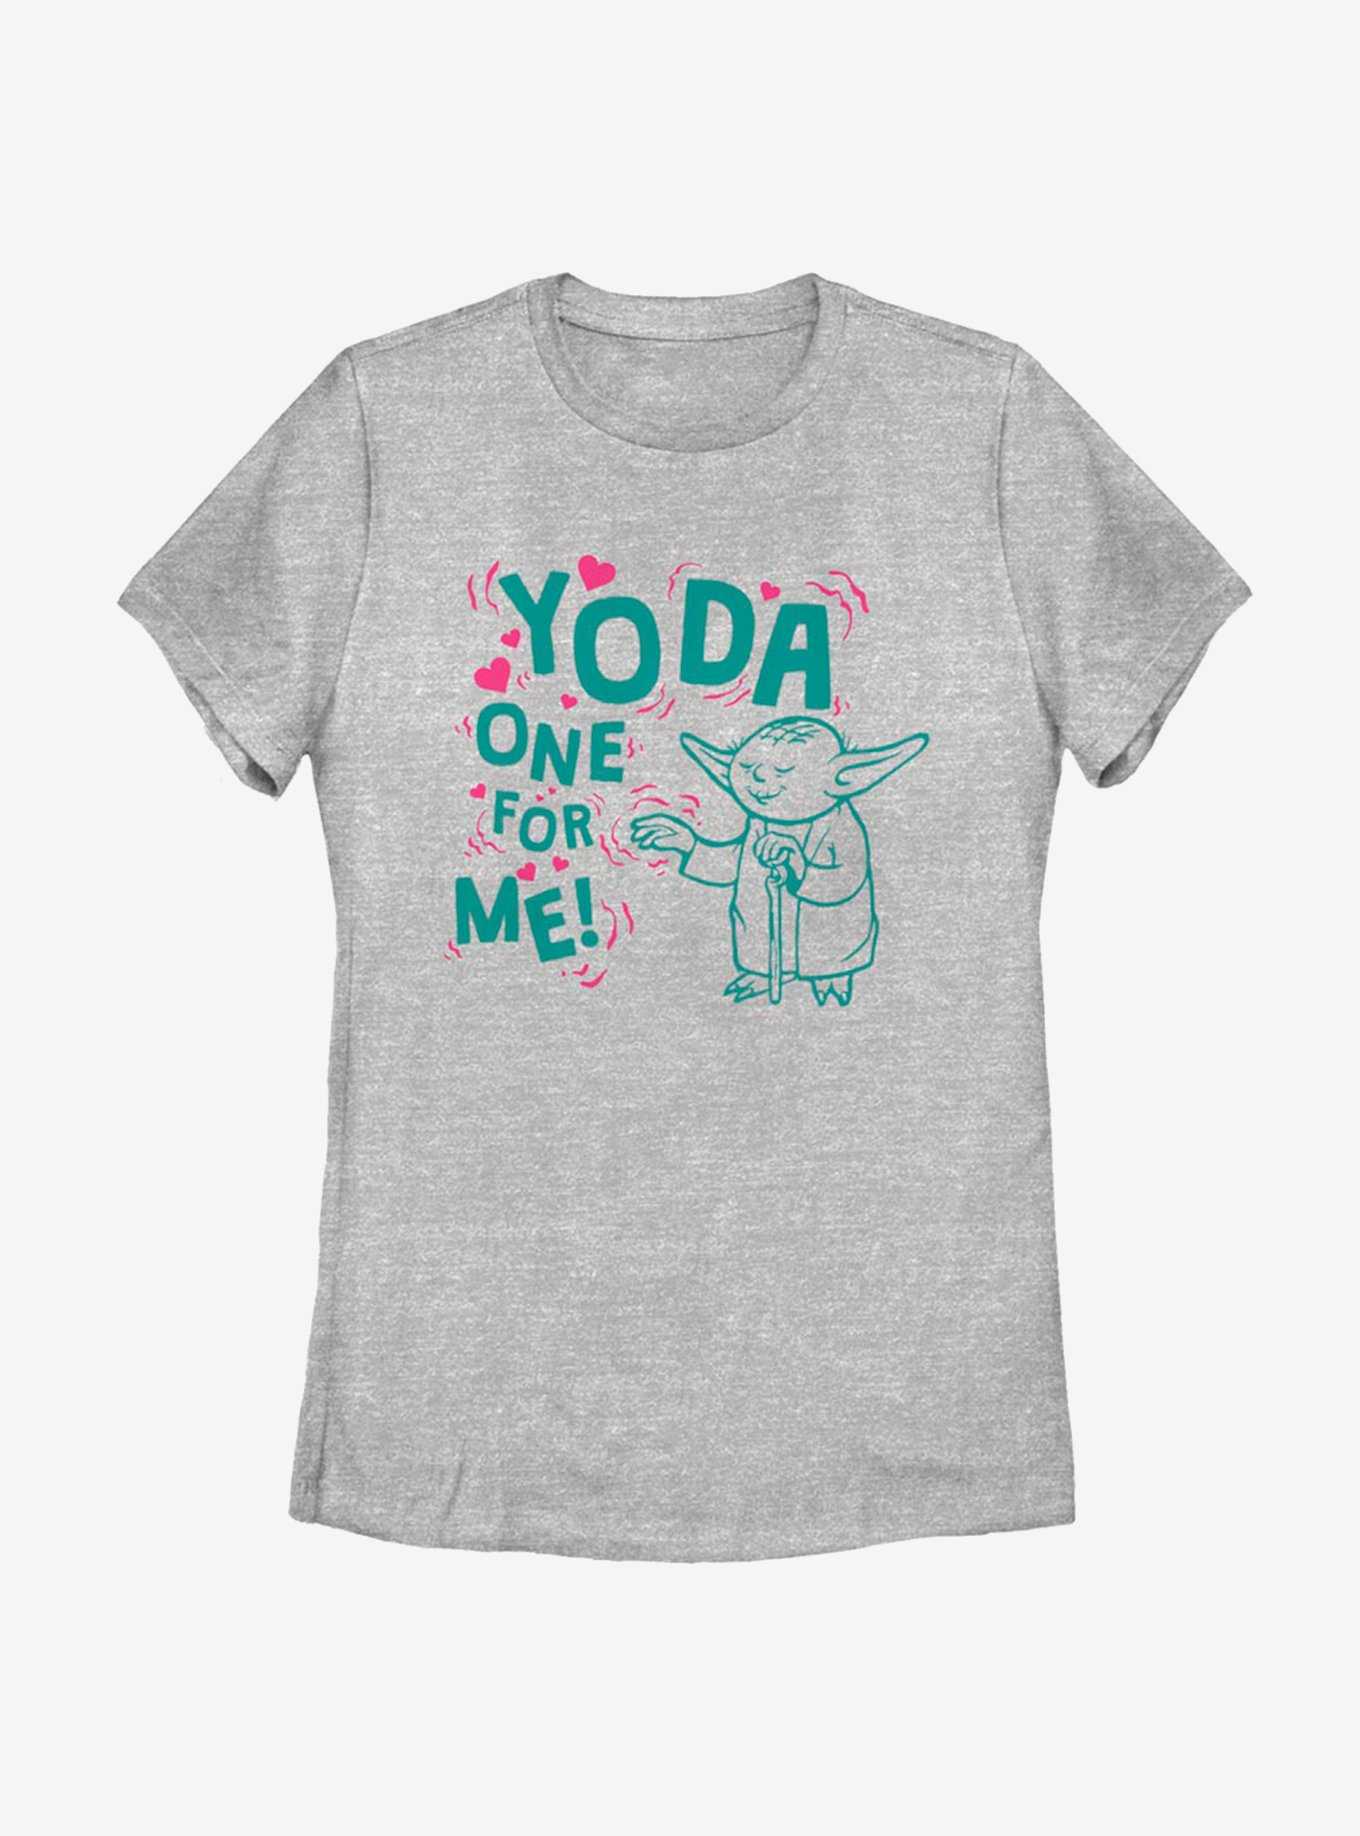 Star Wars Yoda One For Me Outline Womens T-Shirt, , hi-res